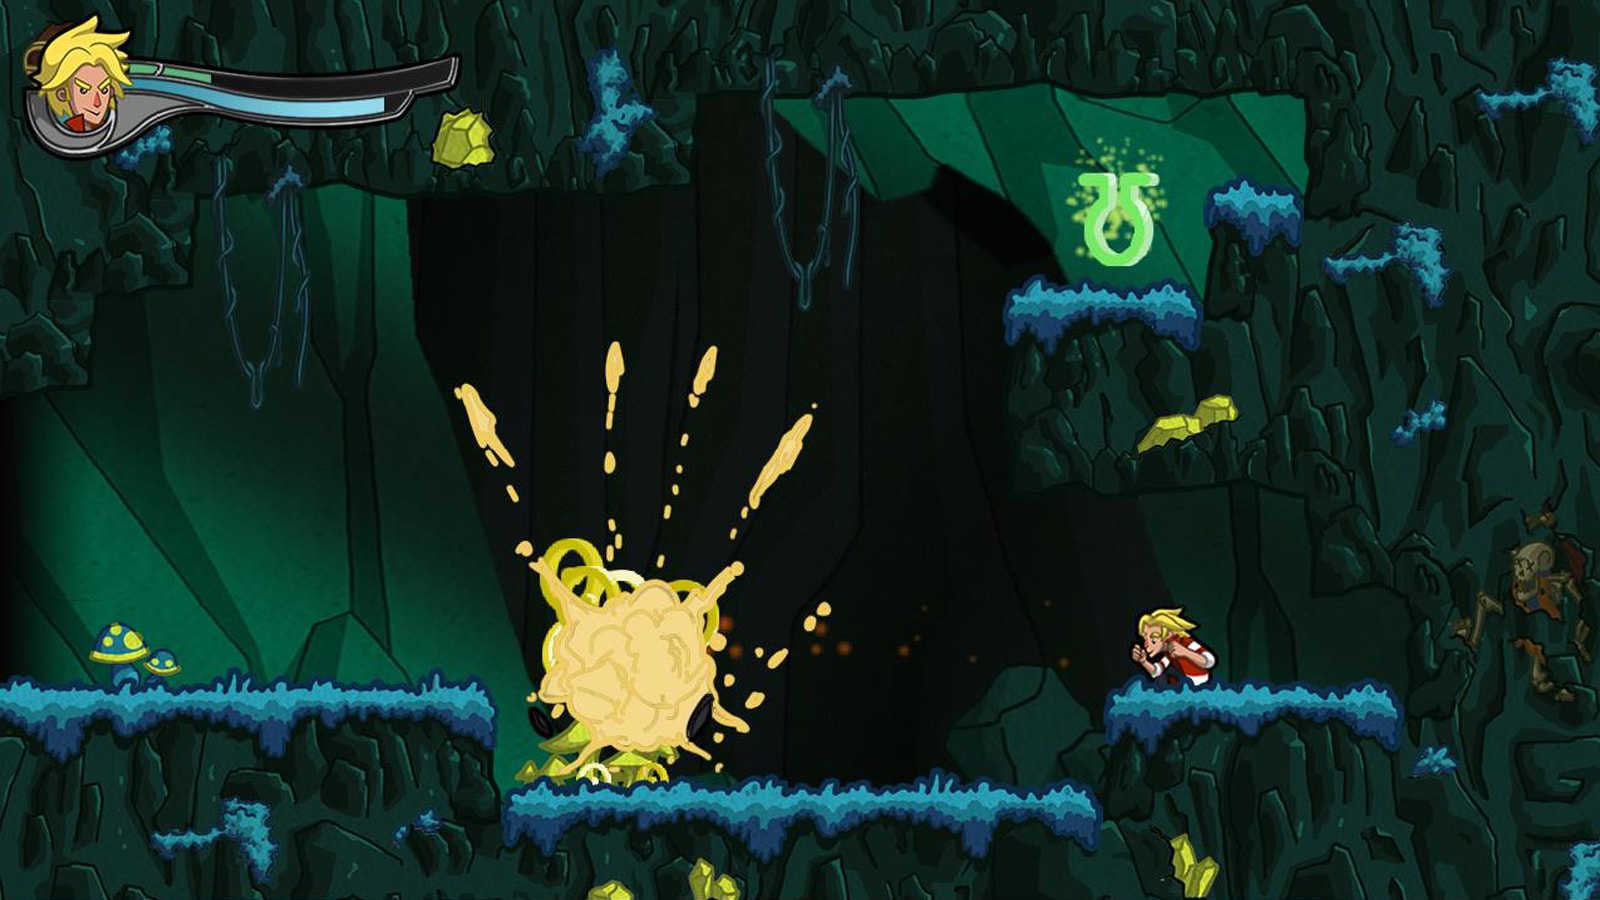 Jero crouches as a yellow explosion occurs across the screen. 